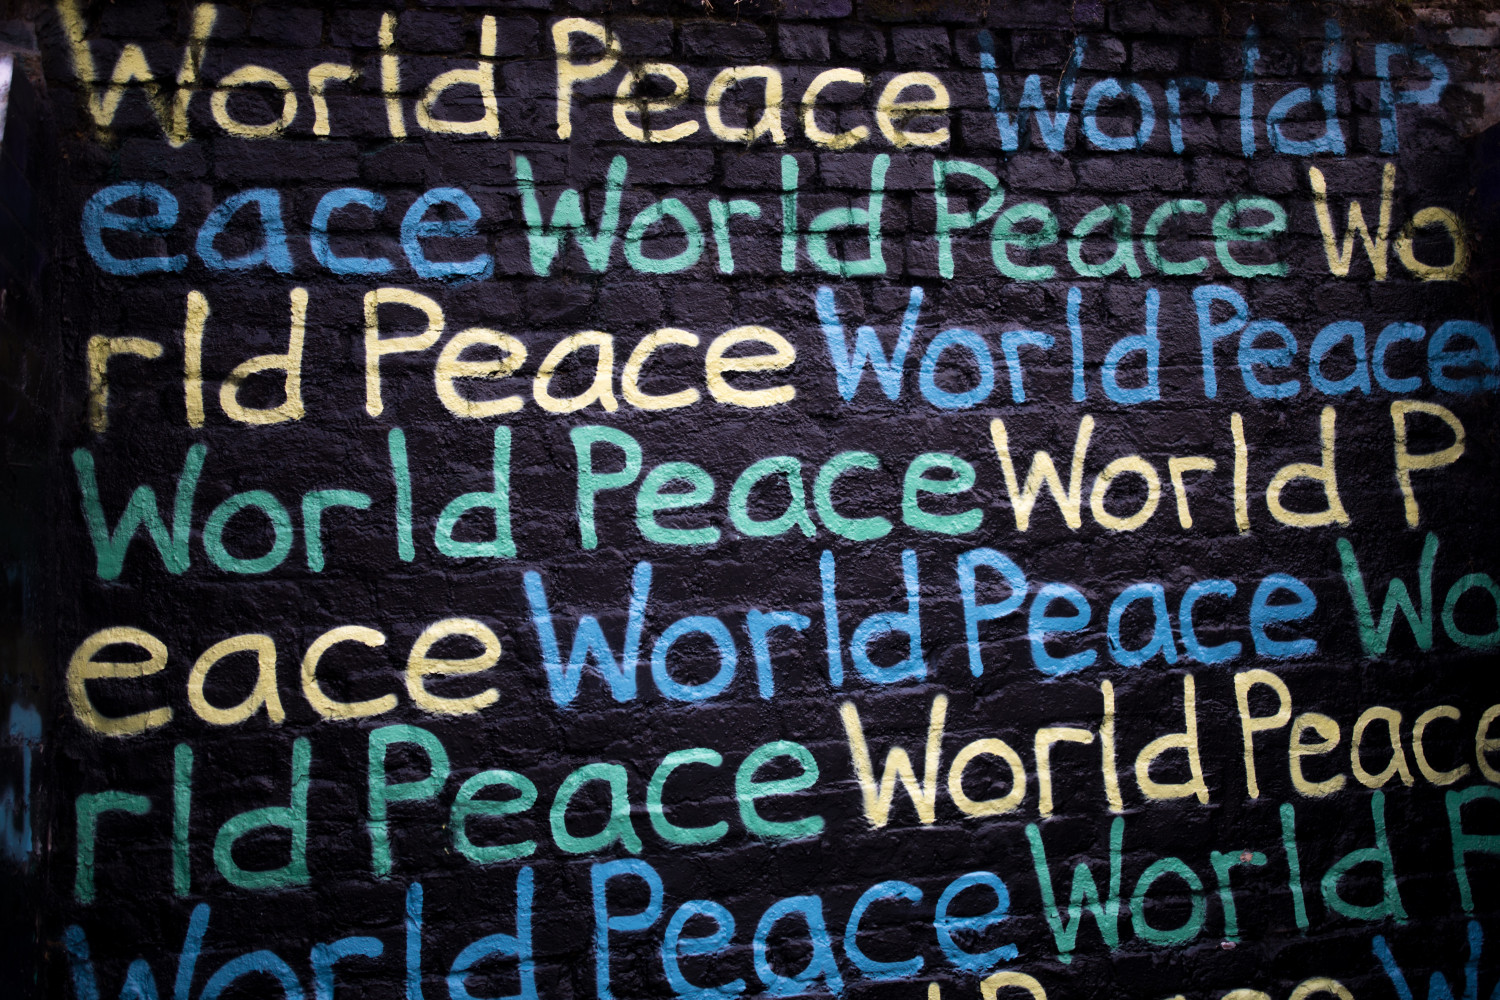 Wall with 'world peace' written in a repeating pattern